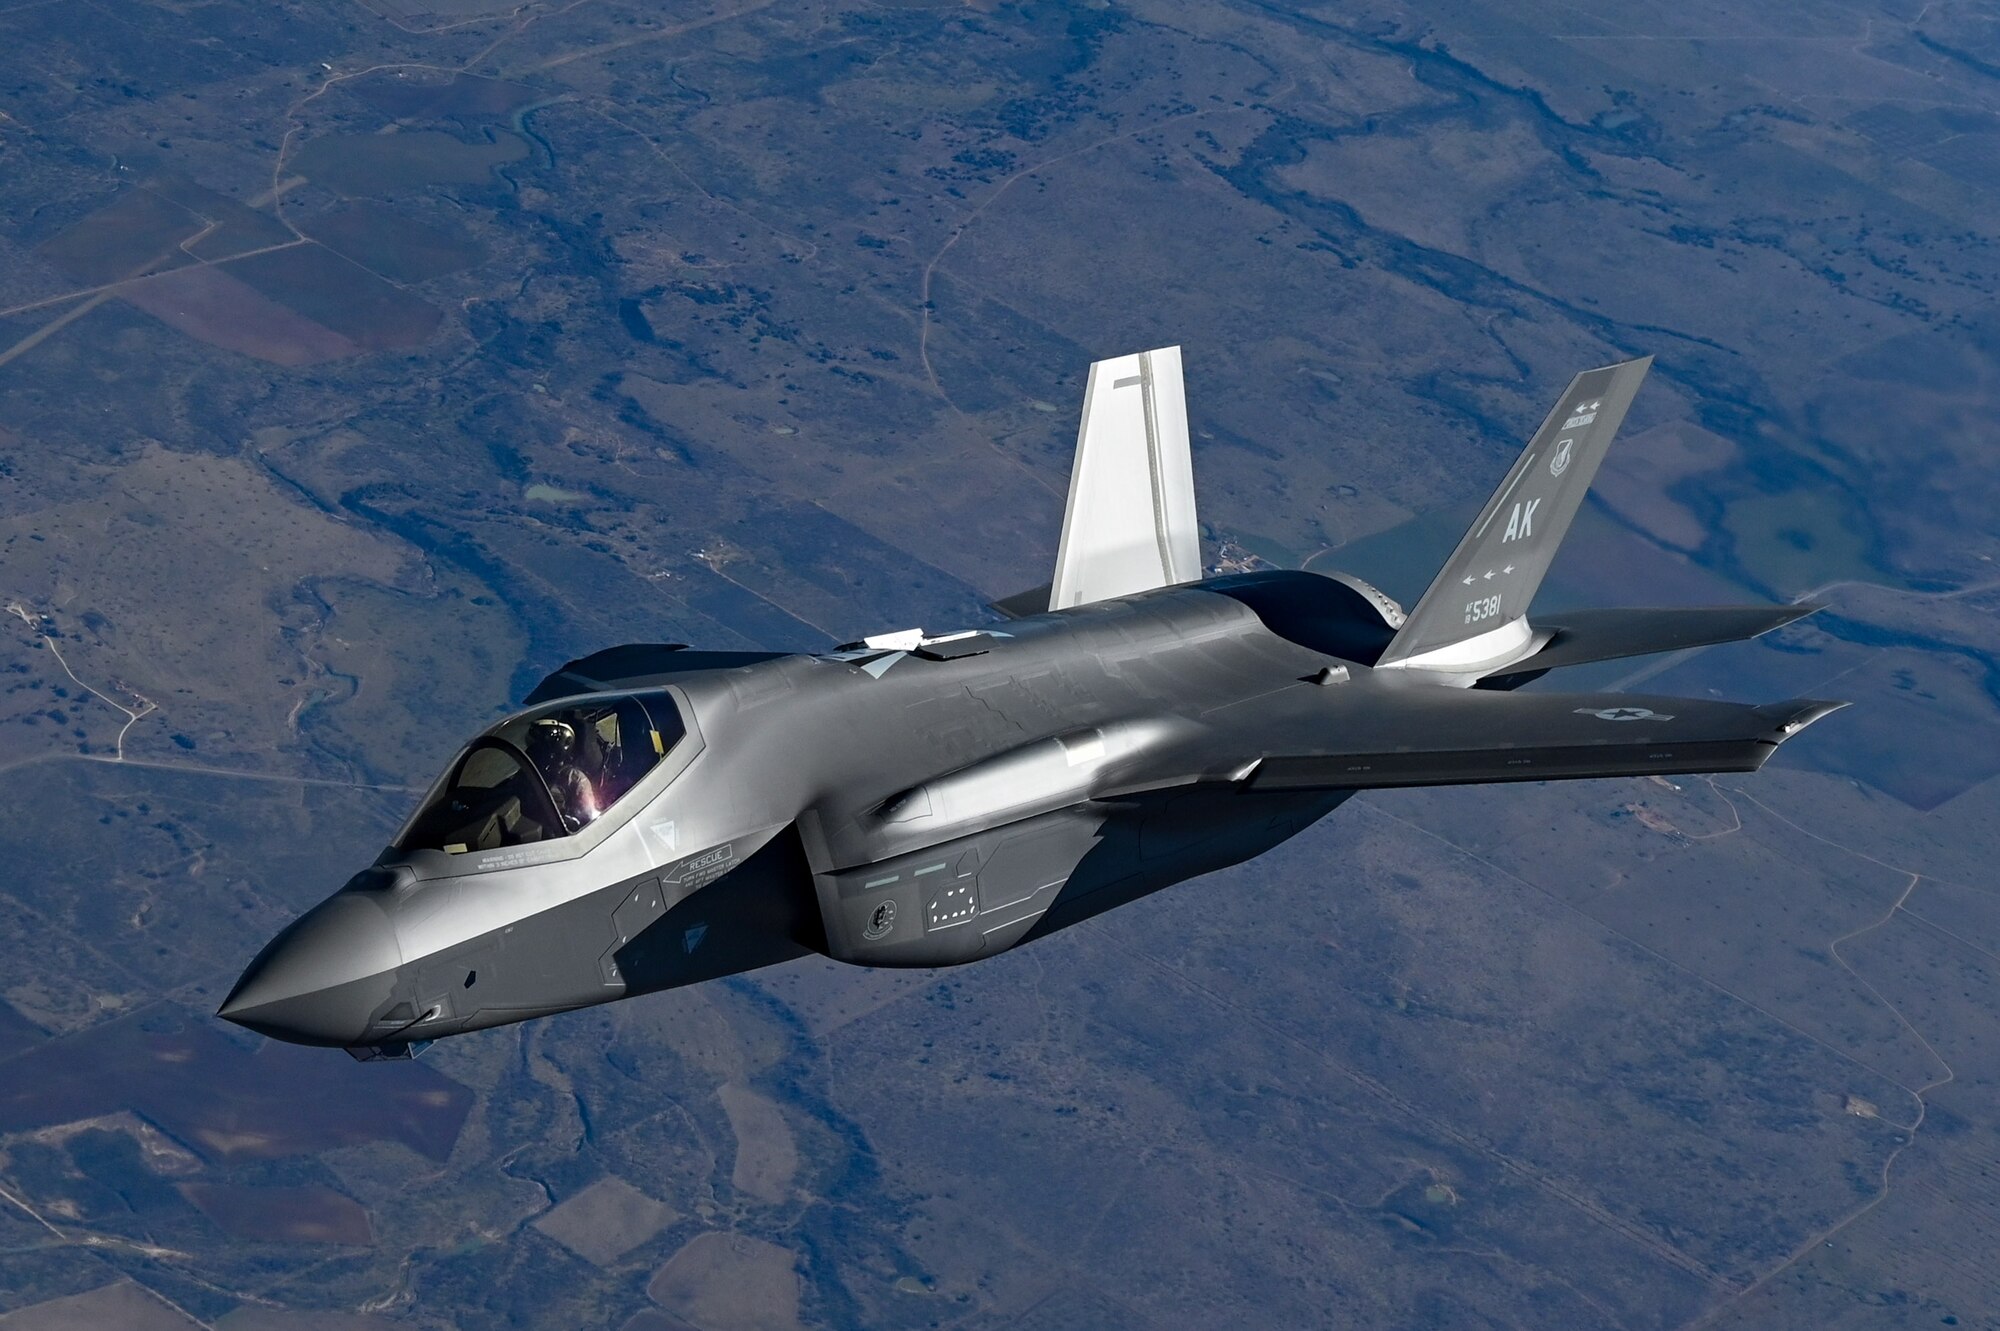 An F-35 Lightning II from the Defense Contract Management Agency conducts its first flight and first tanking with a KC-135R Stratotanker from the 465th Air Refueling Squadron, Tinker Air Force Base, Oklahoma, Feb. 24, 2021. Once fully tested this F-35 will join the fleet at Eielson Air Force Base, Alaska. (U.S. Air Force photo by Senior Airman Mary Begy)